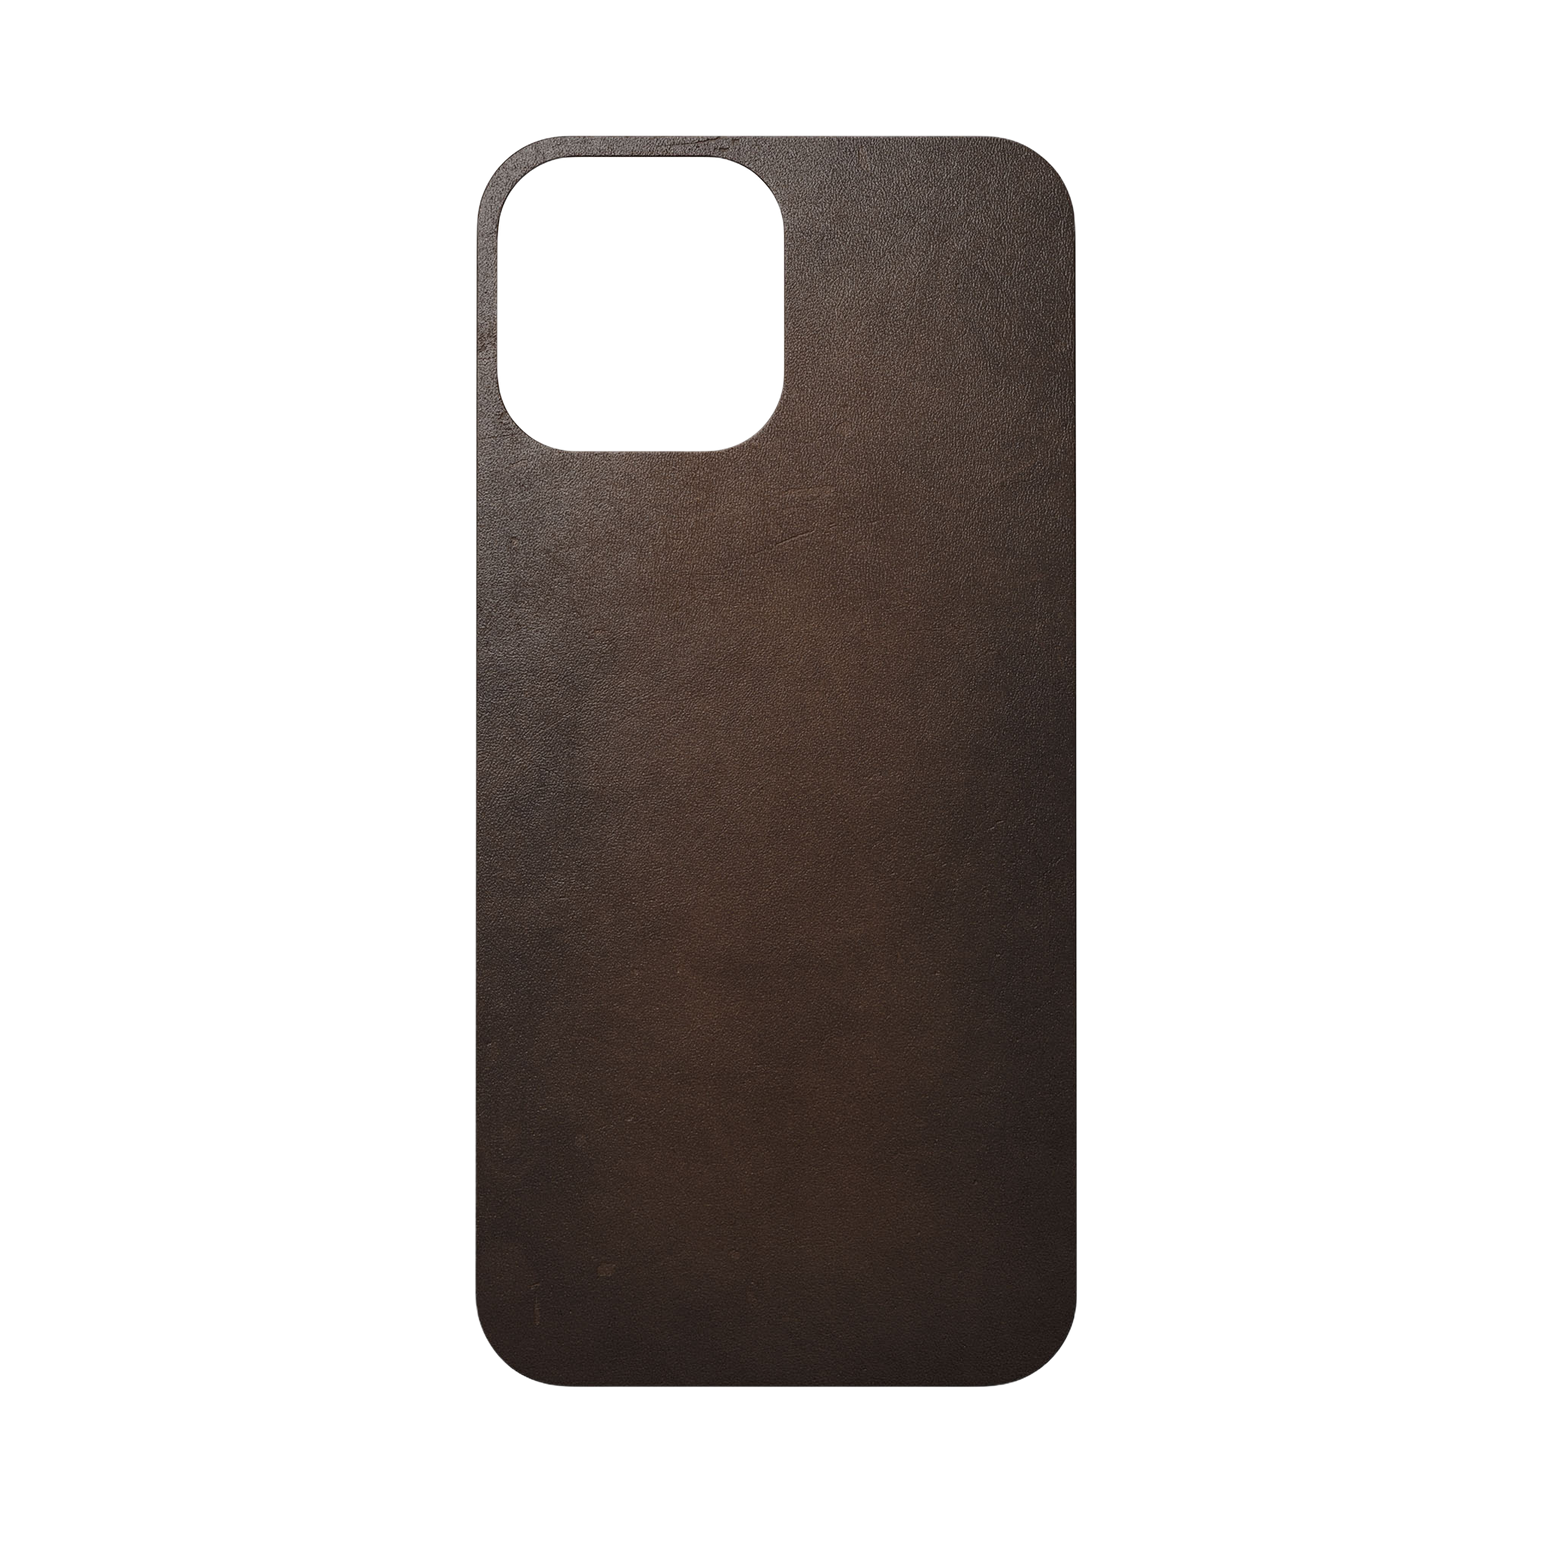 Nomad Skin with Horween Leather for iPhone 13 Pro Max - Rustic Brown - Discontinued